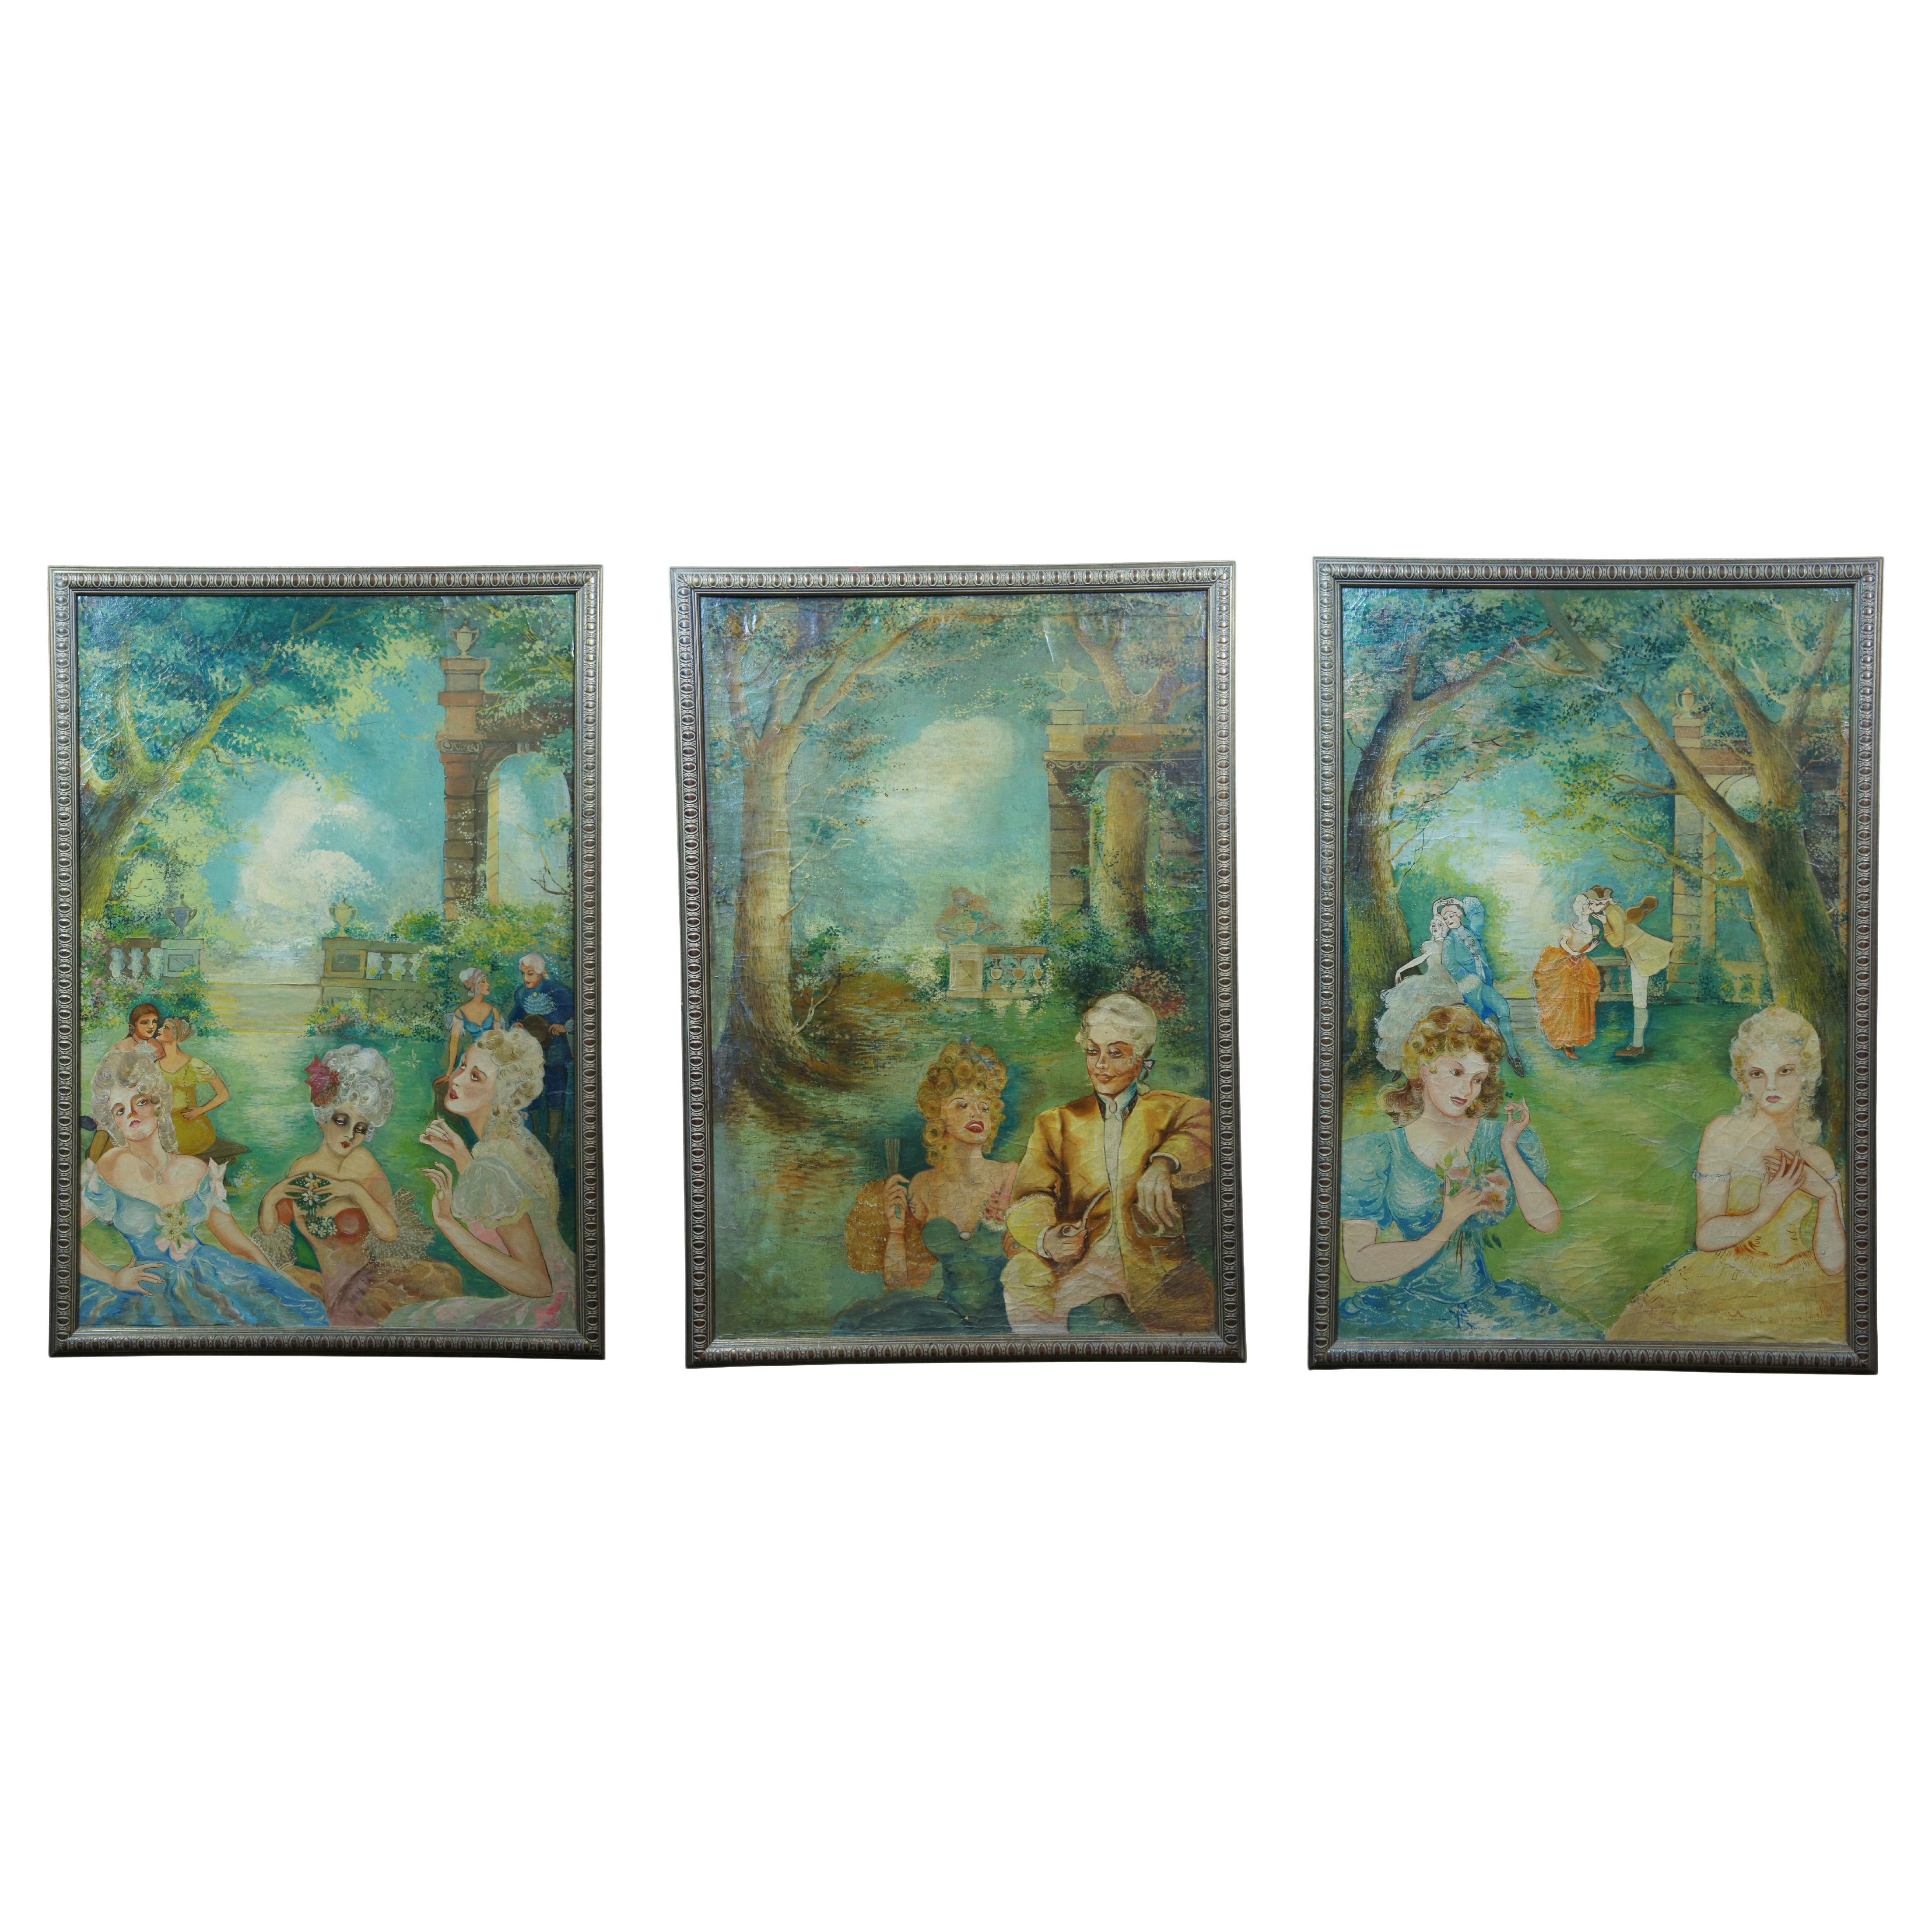 3 Vintage French Colonial Court Garden Party Scene Oil Paintings on Board 50" For Sale